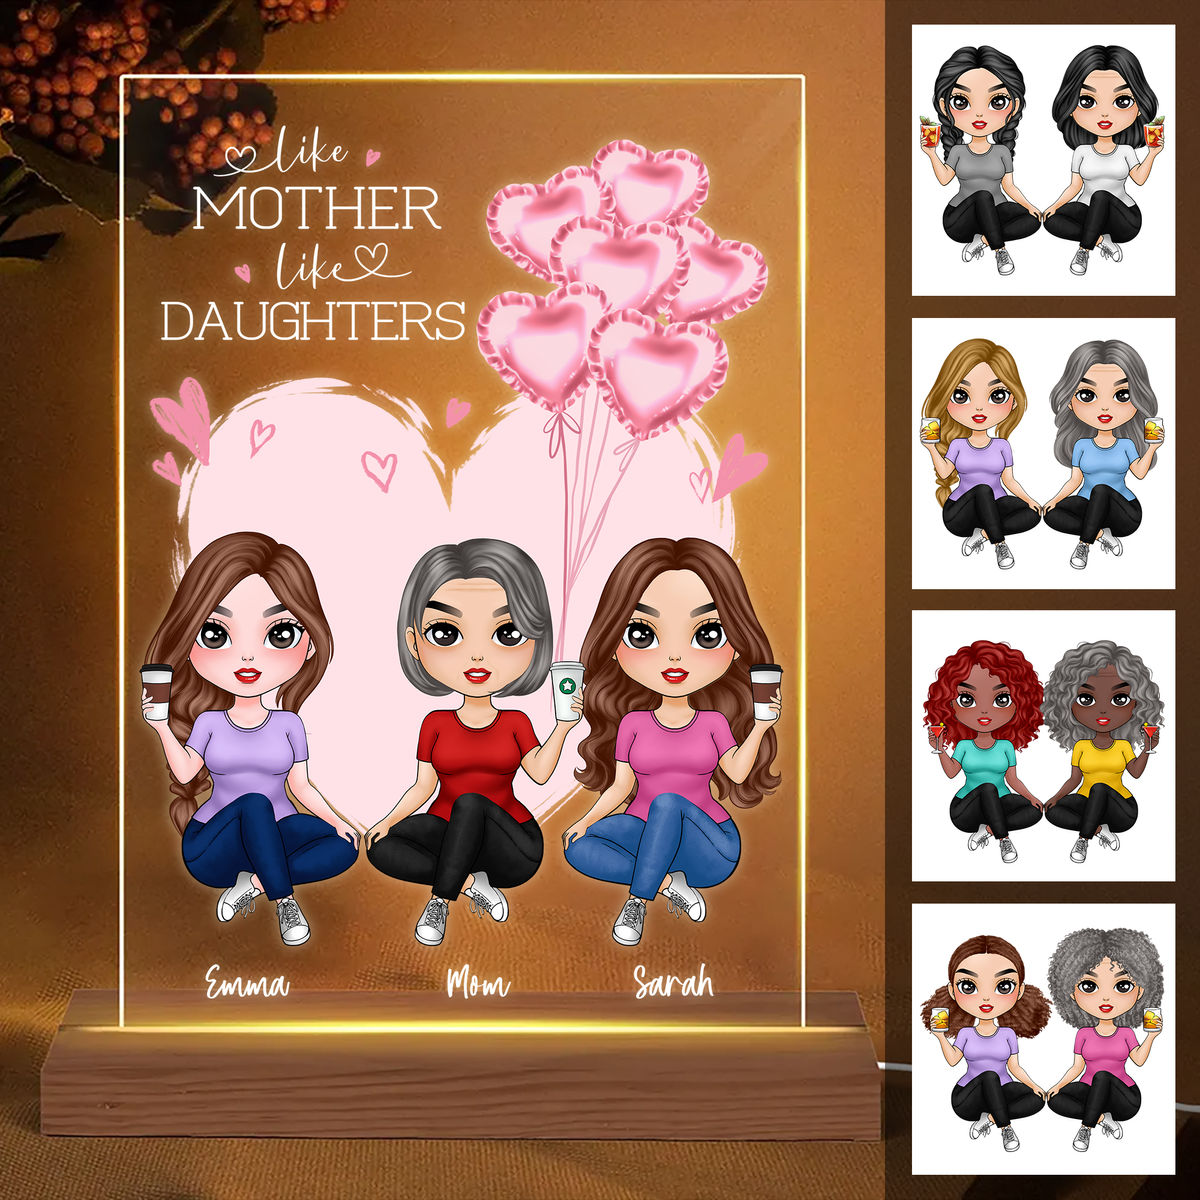 Mother's Day Gift - Like Mother Like Daughters - Personalized 3D LED Light Wooden Base - Mother's Day GIft